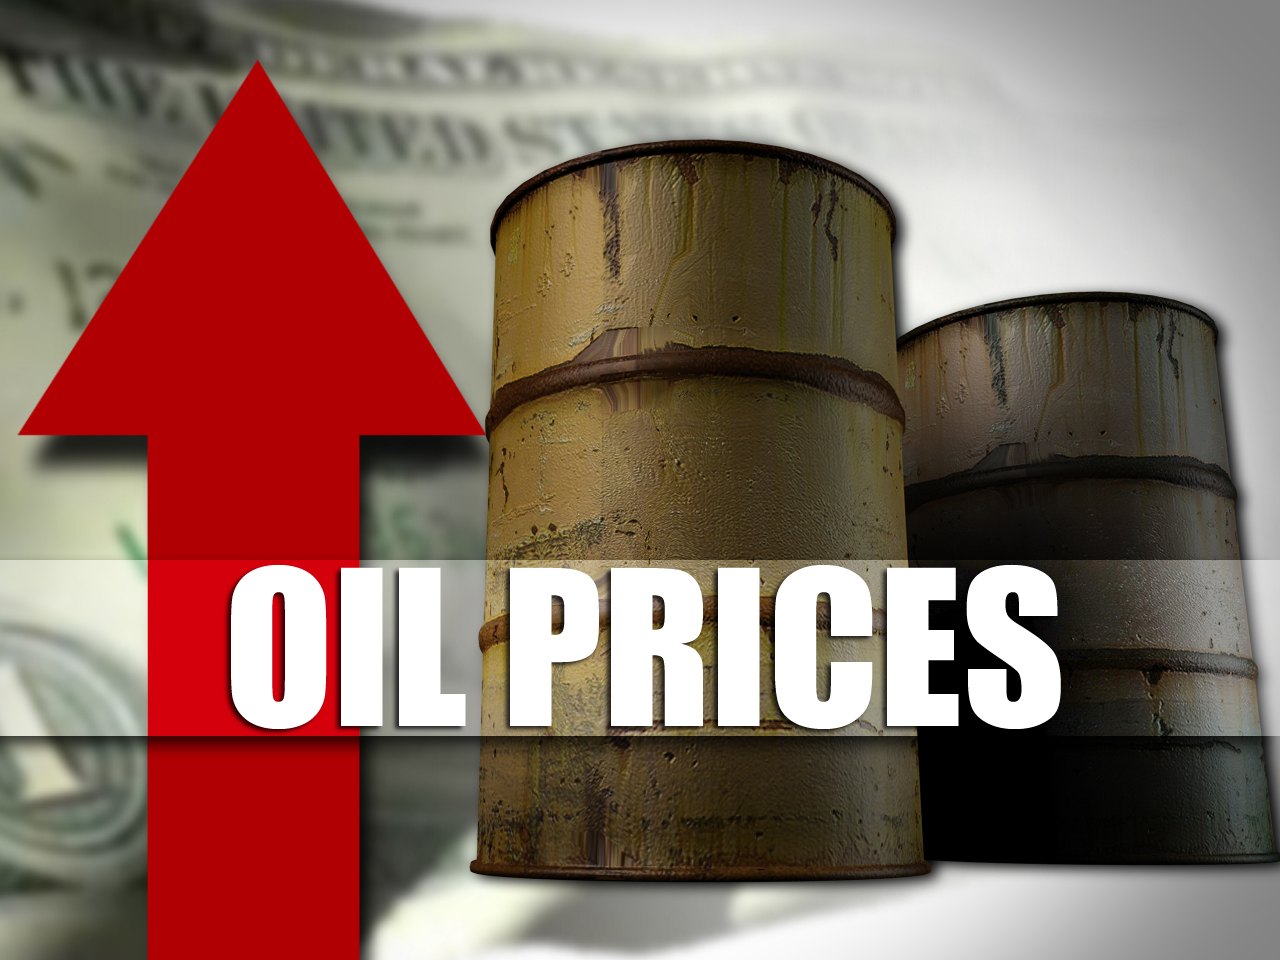 Crude prices climb on optimism over output cut